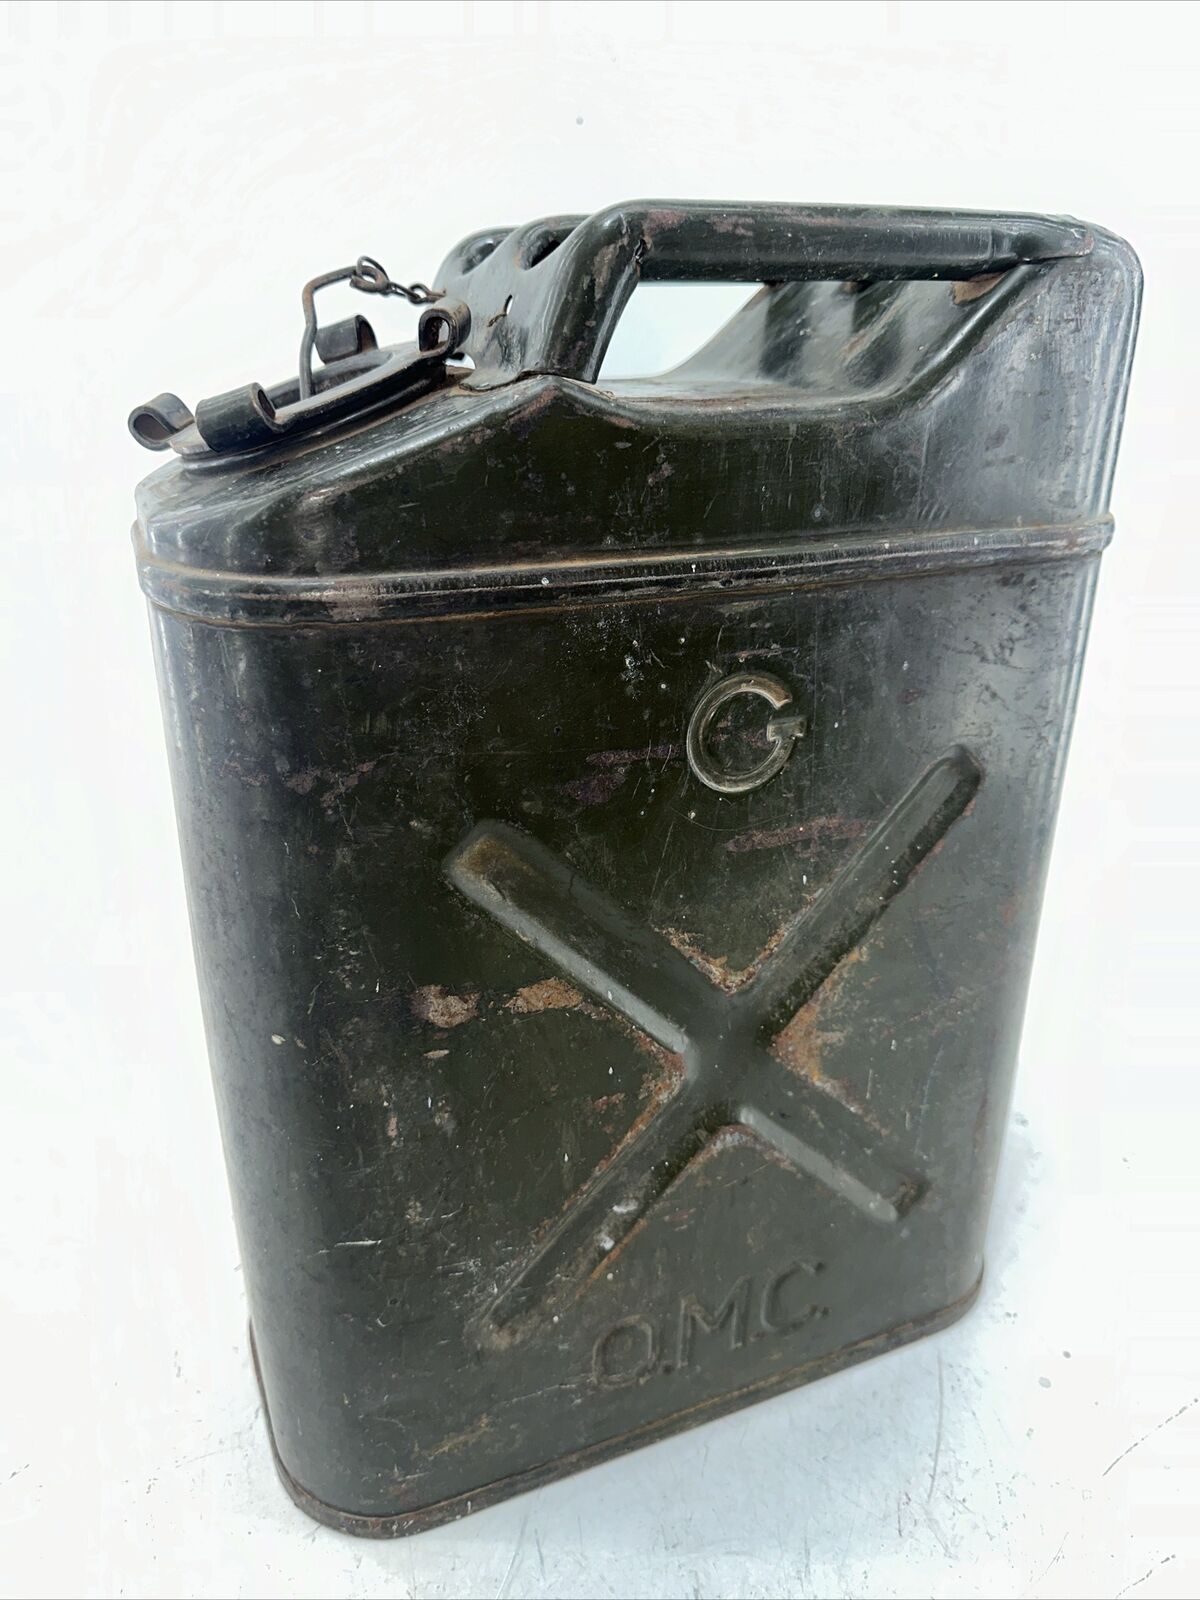 USMC 1949 Jerry Can W/Spout QMC By Nesco US Army Vintage Metal Gas Can Ratrod